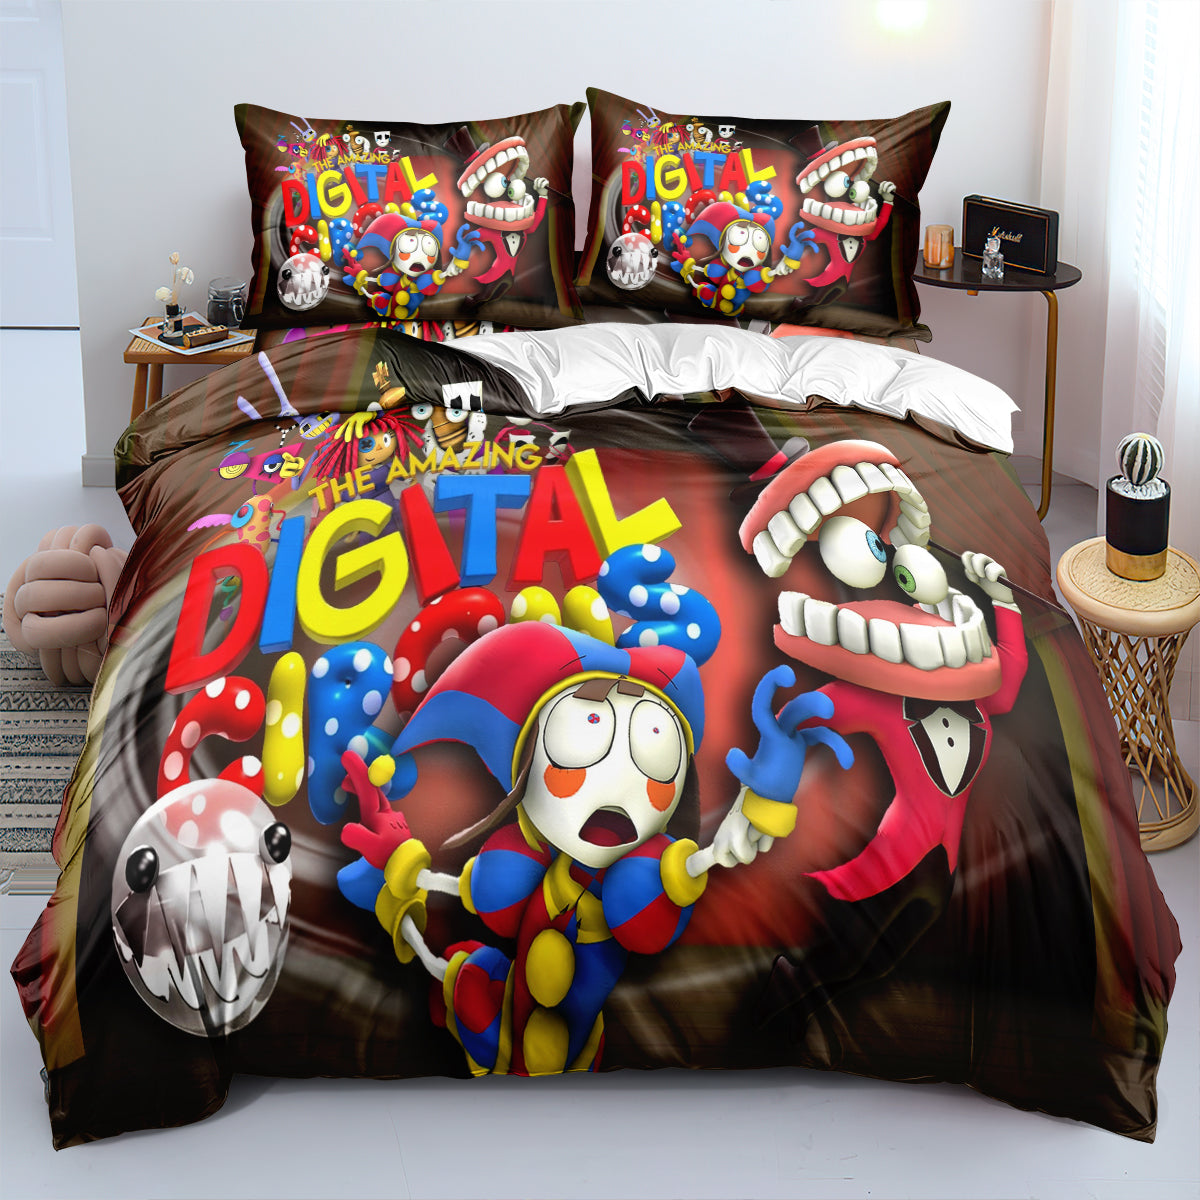 The Amazing Digital Circus #13 3D Printed Duvet Cover Quilt Cover Pillowcase Bedding Set Bed Linen Home Decor